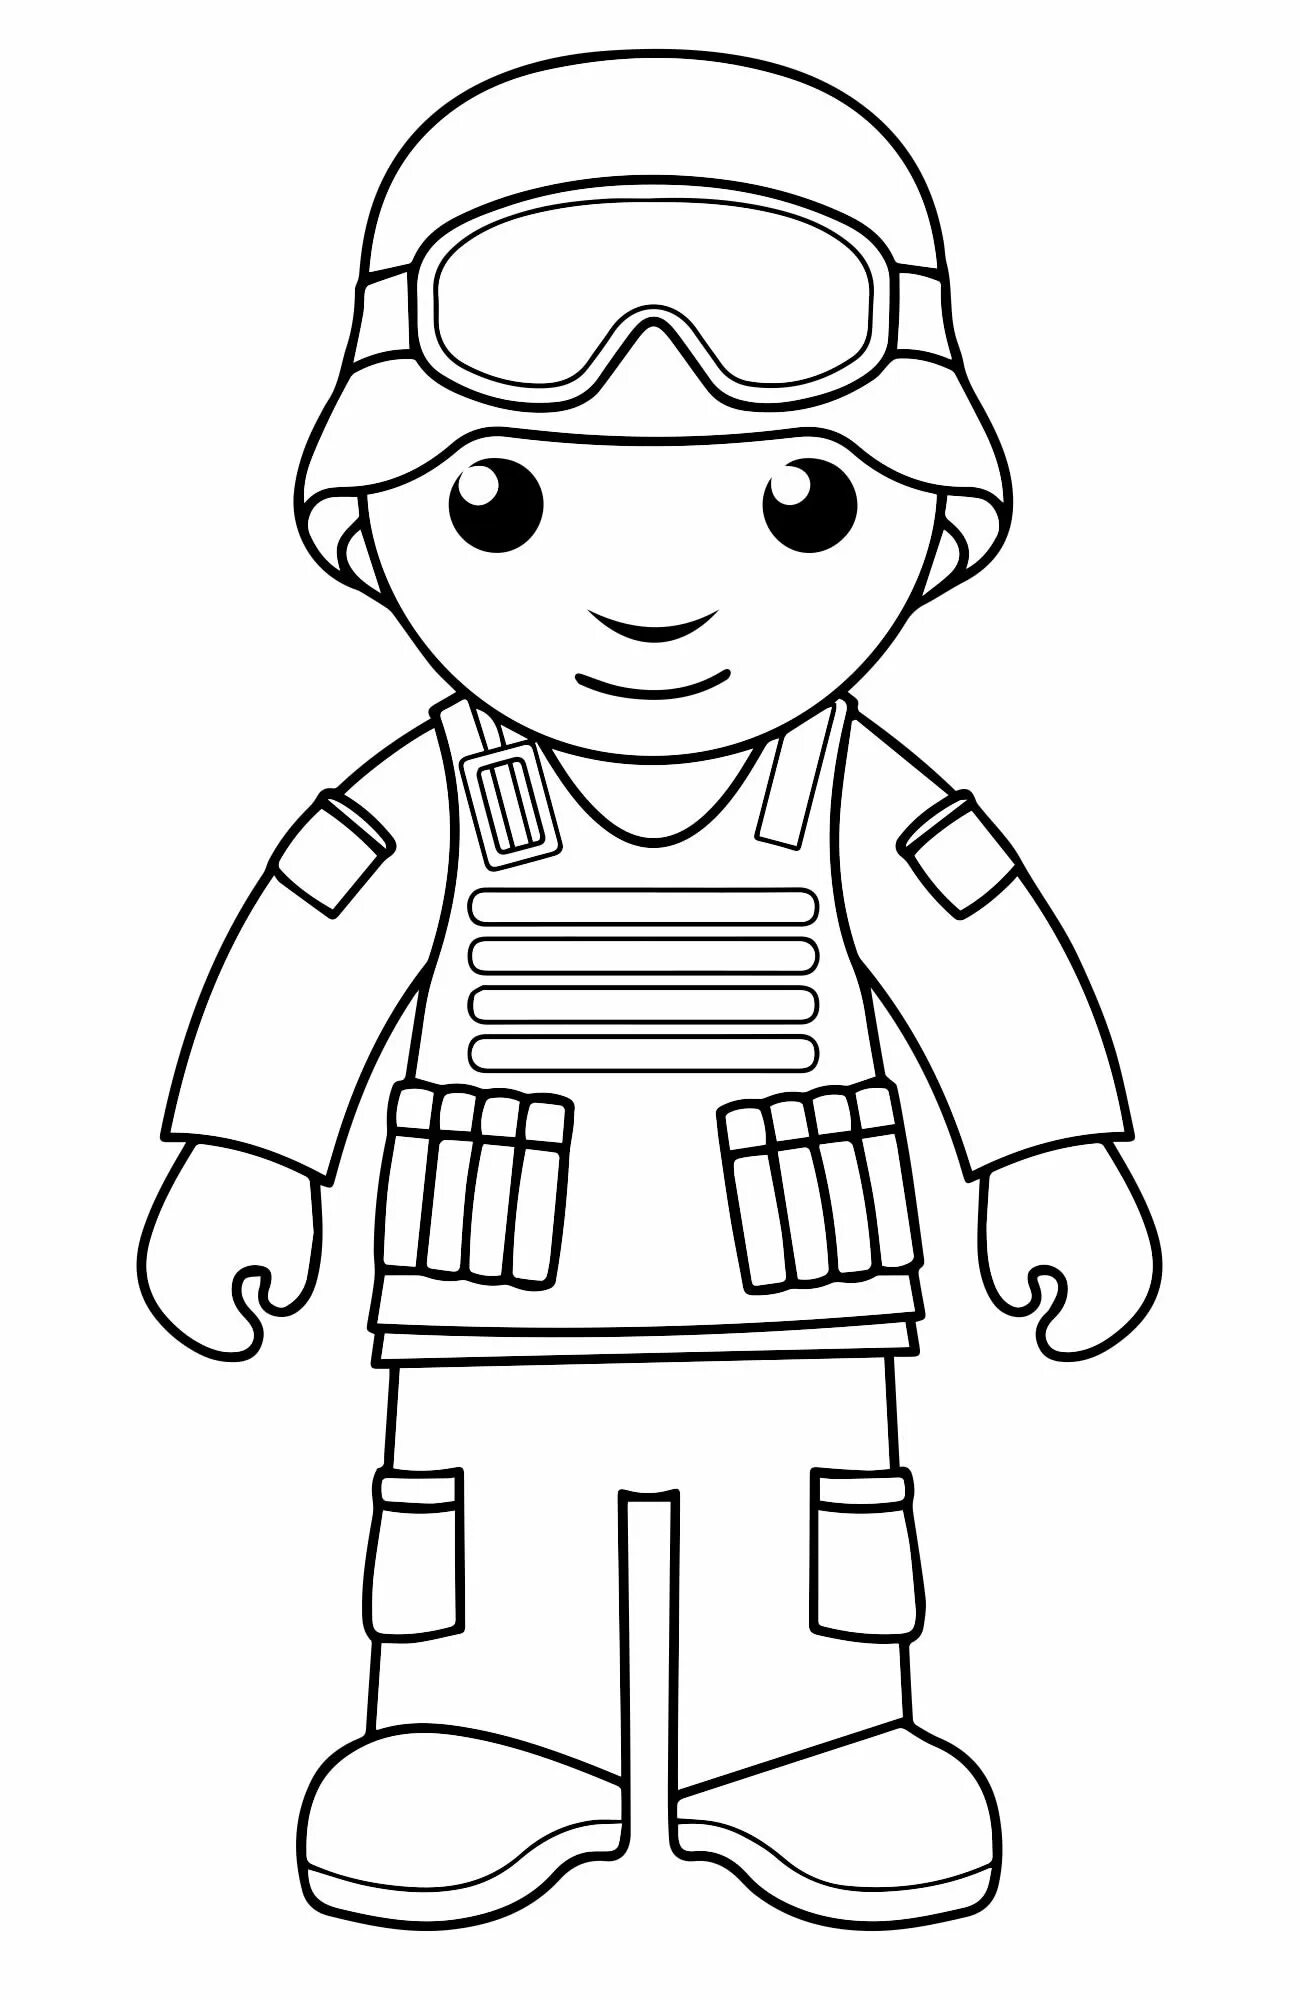 Military soldiers for kids #7